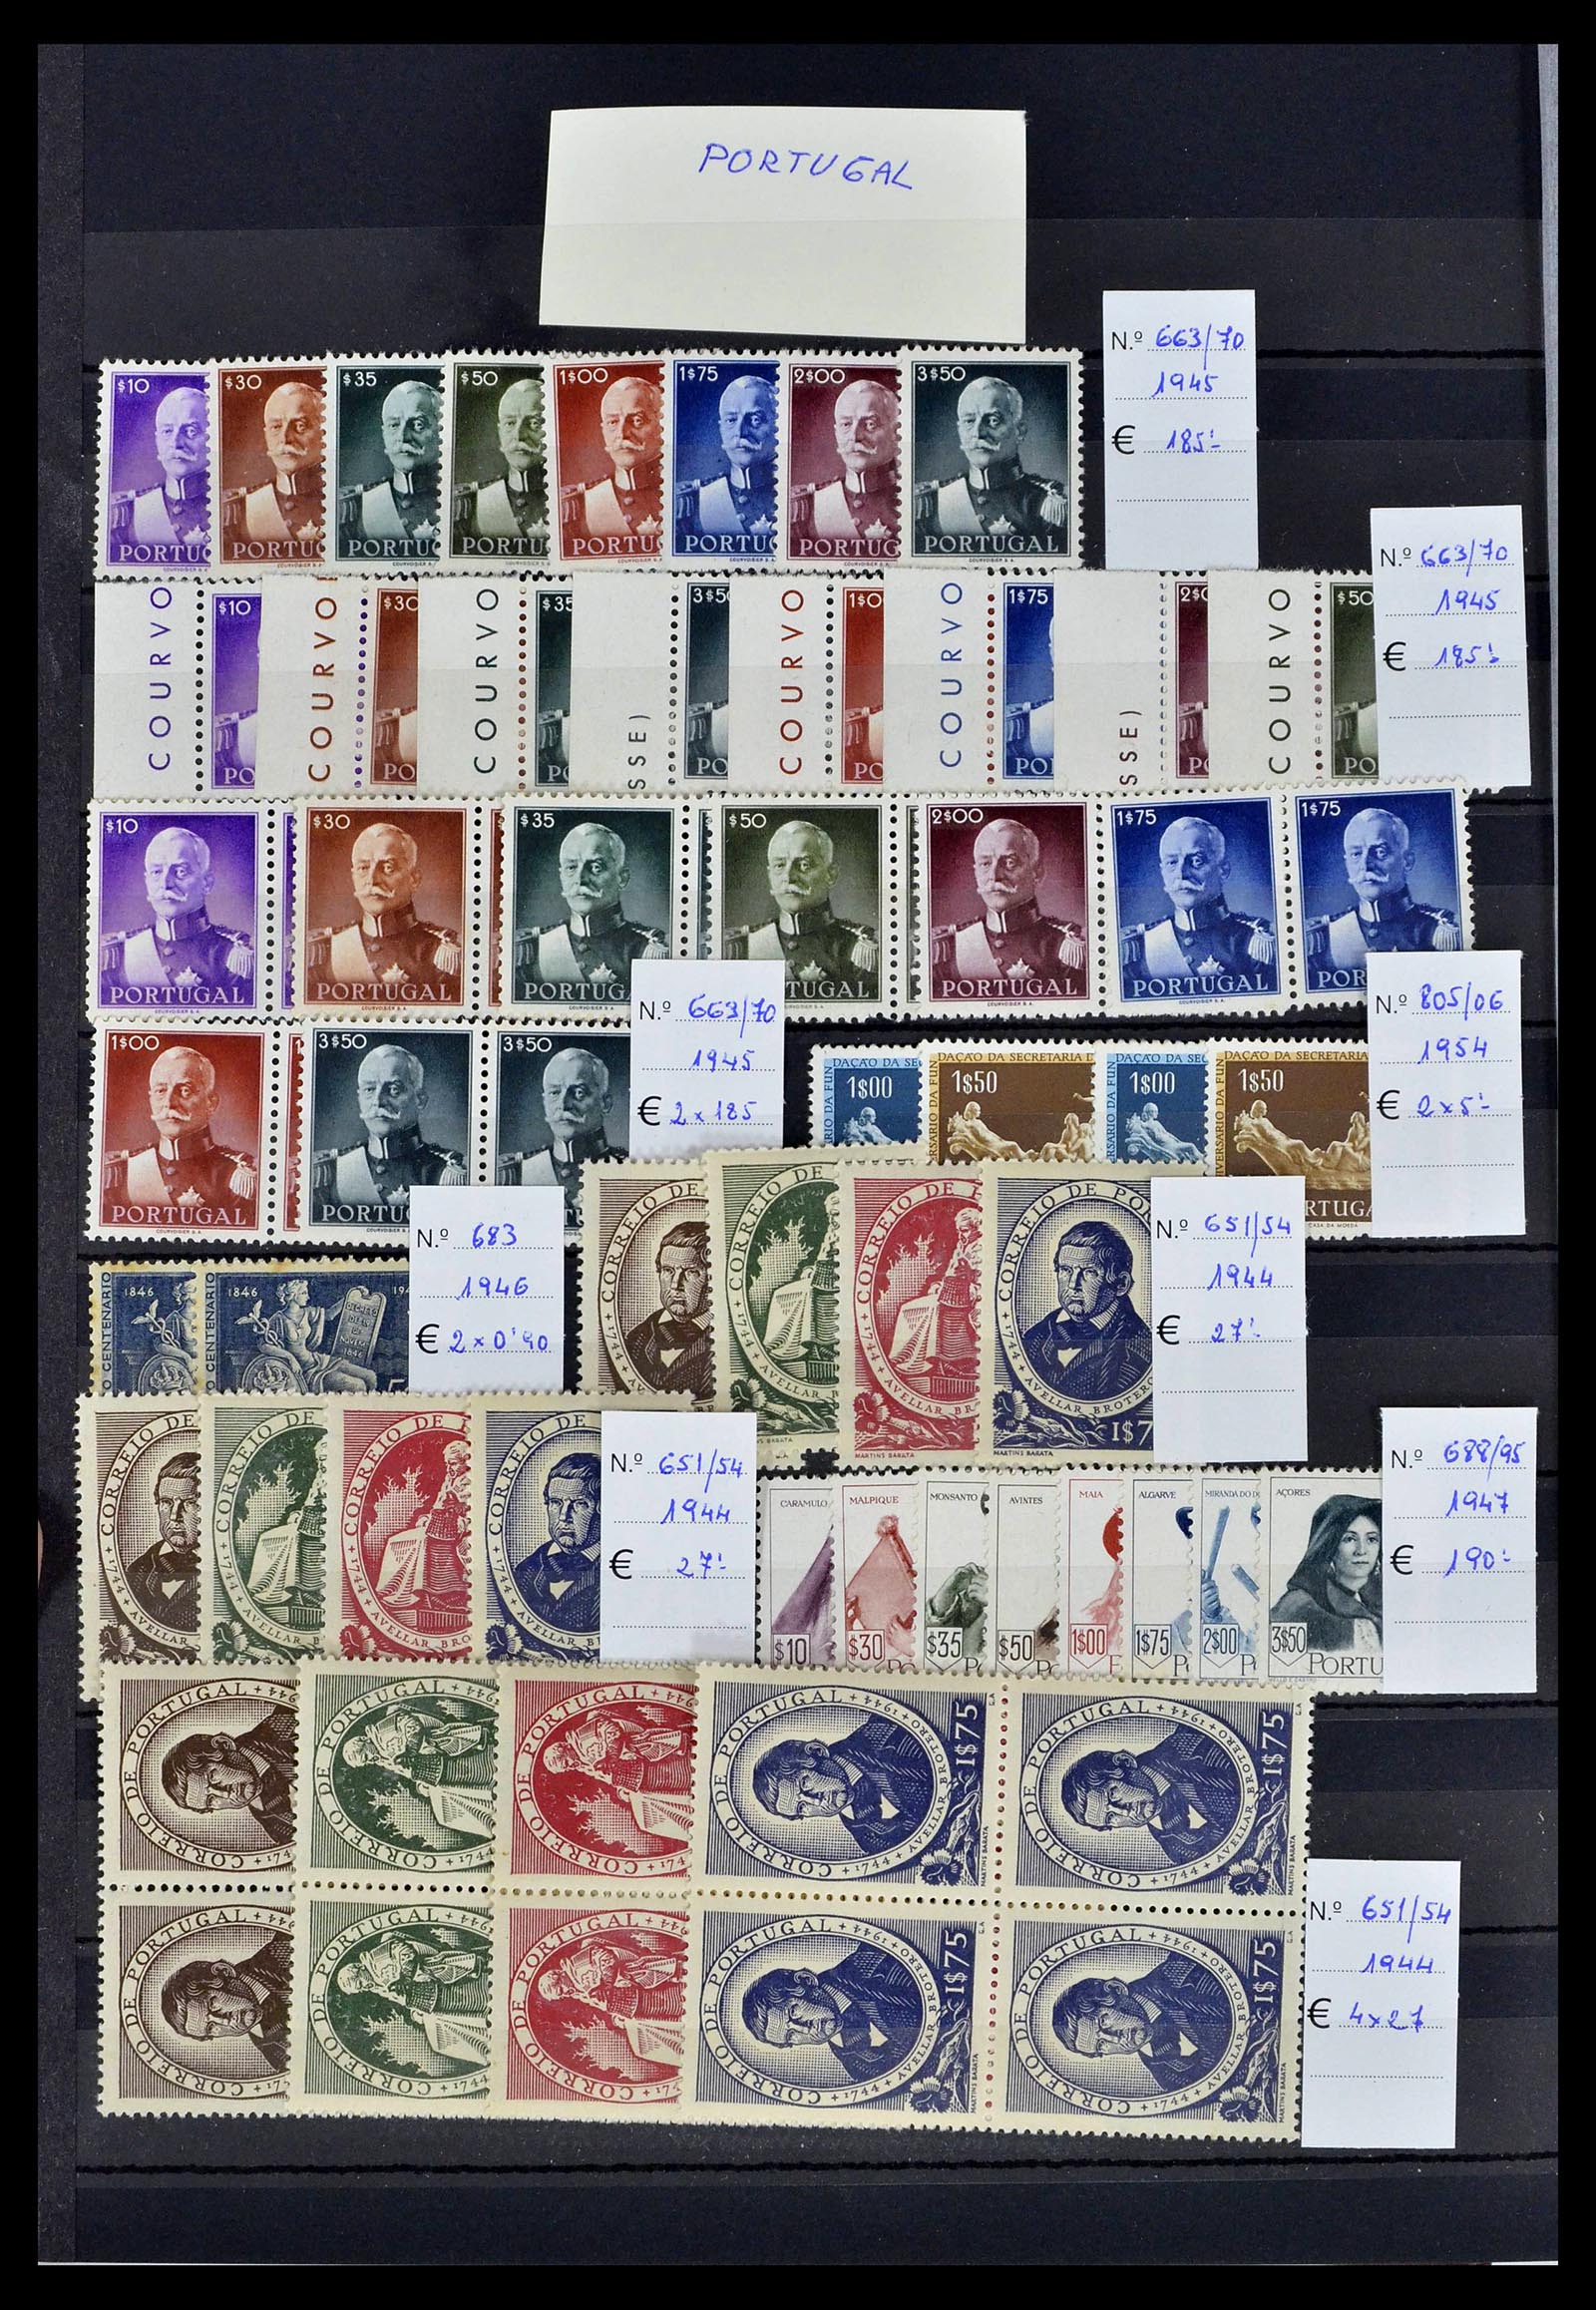 39236 0007 - Stamp collection 39236 European countries 40s-60s.